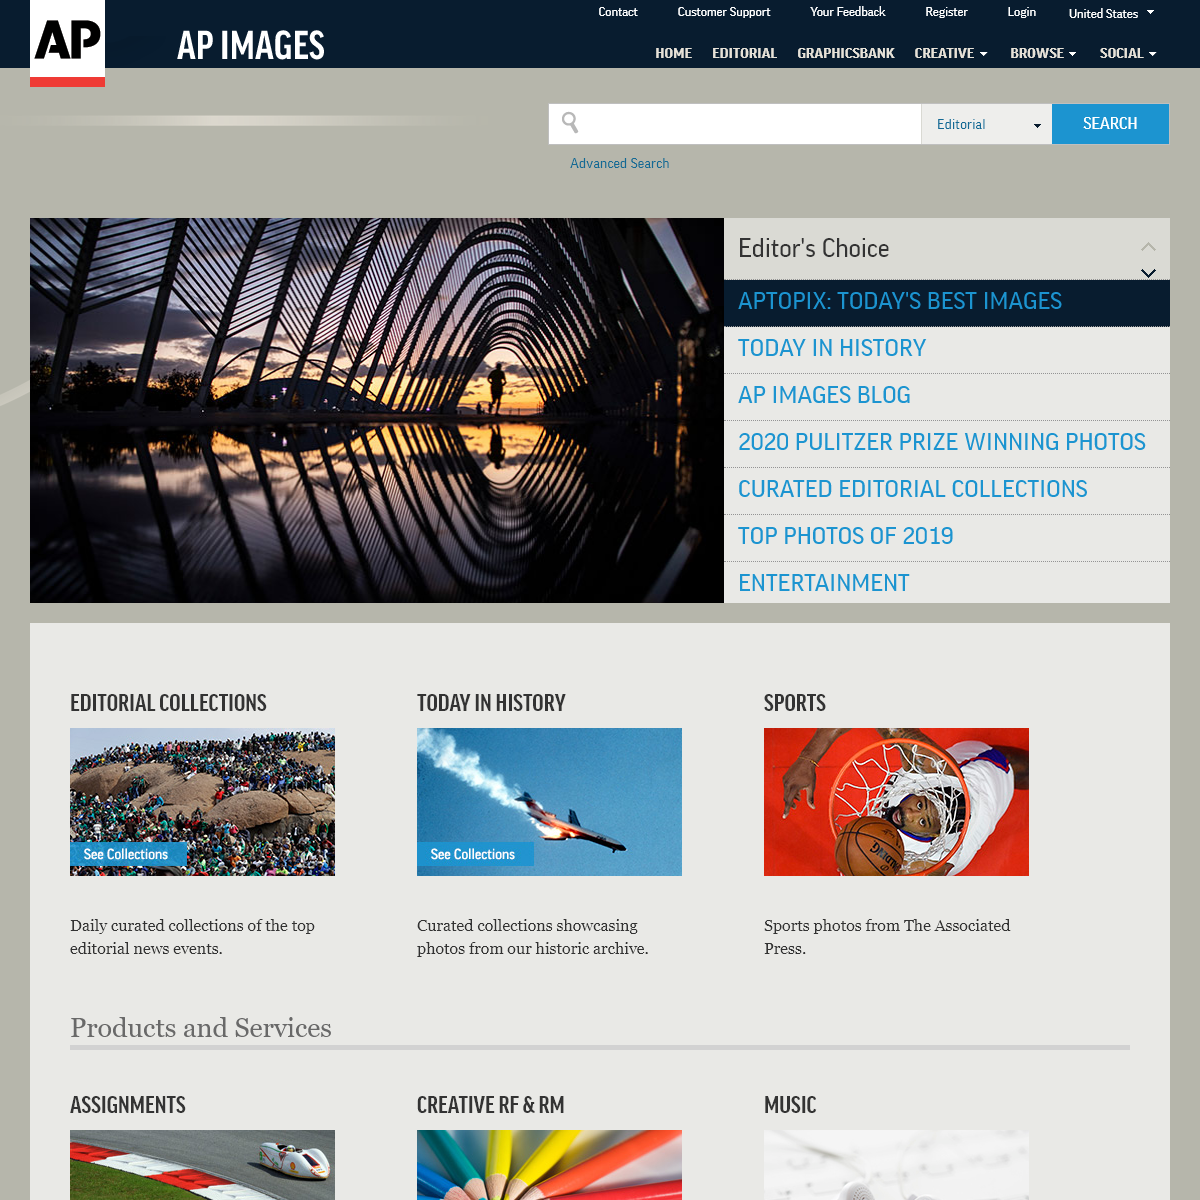 A complete backup of apimages.com